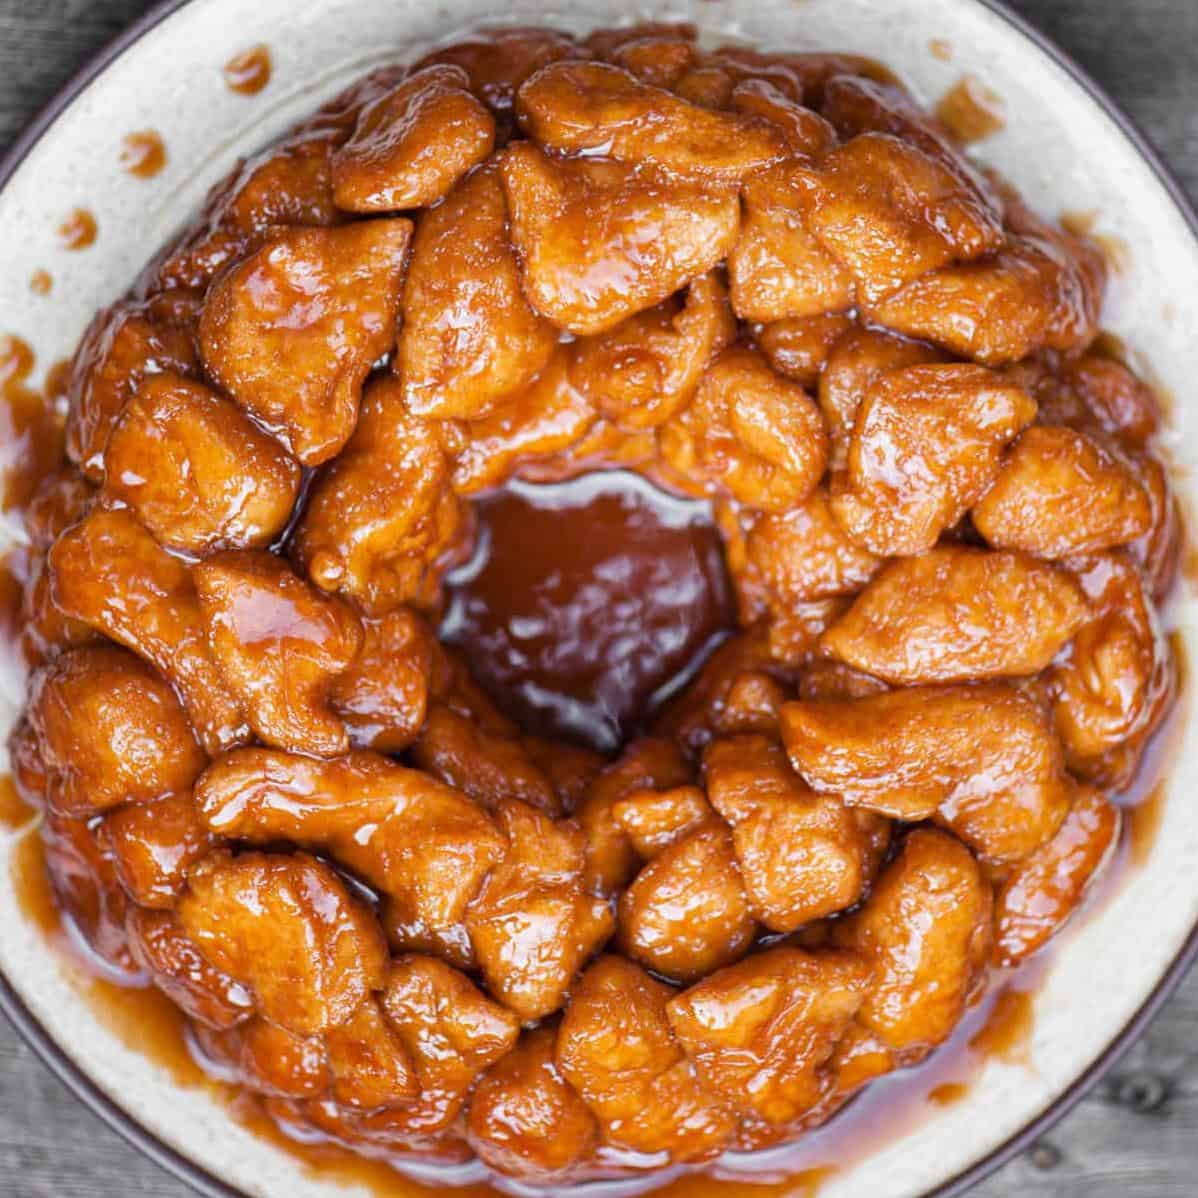  The sweet aroma of cinnamon and brown sugar fills the air as I prepare Granny's Monkey Bread.